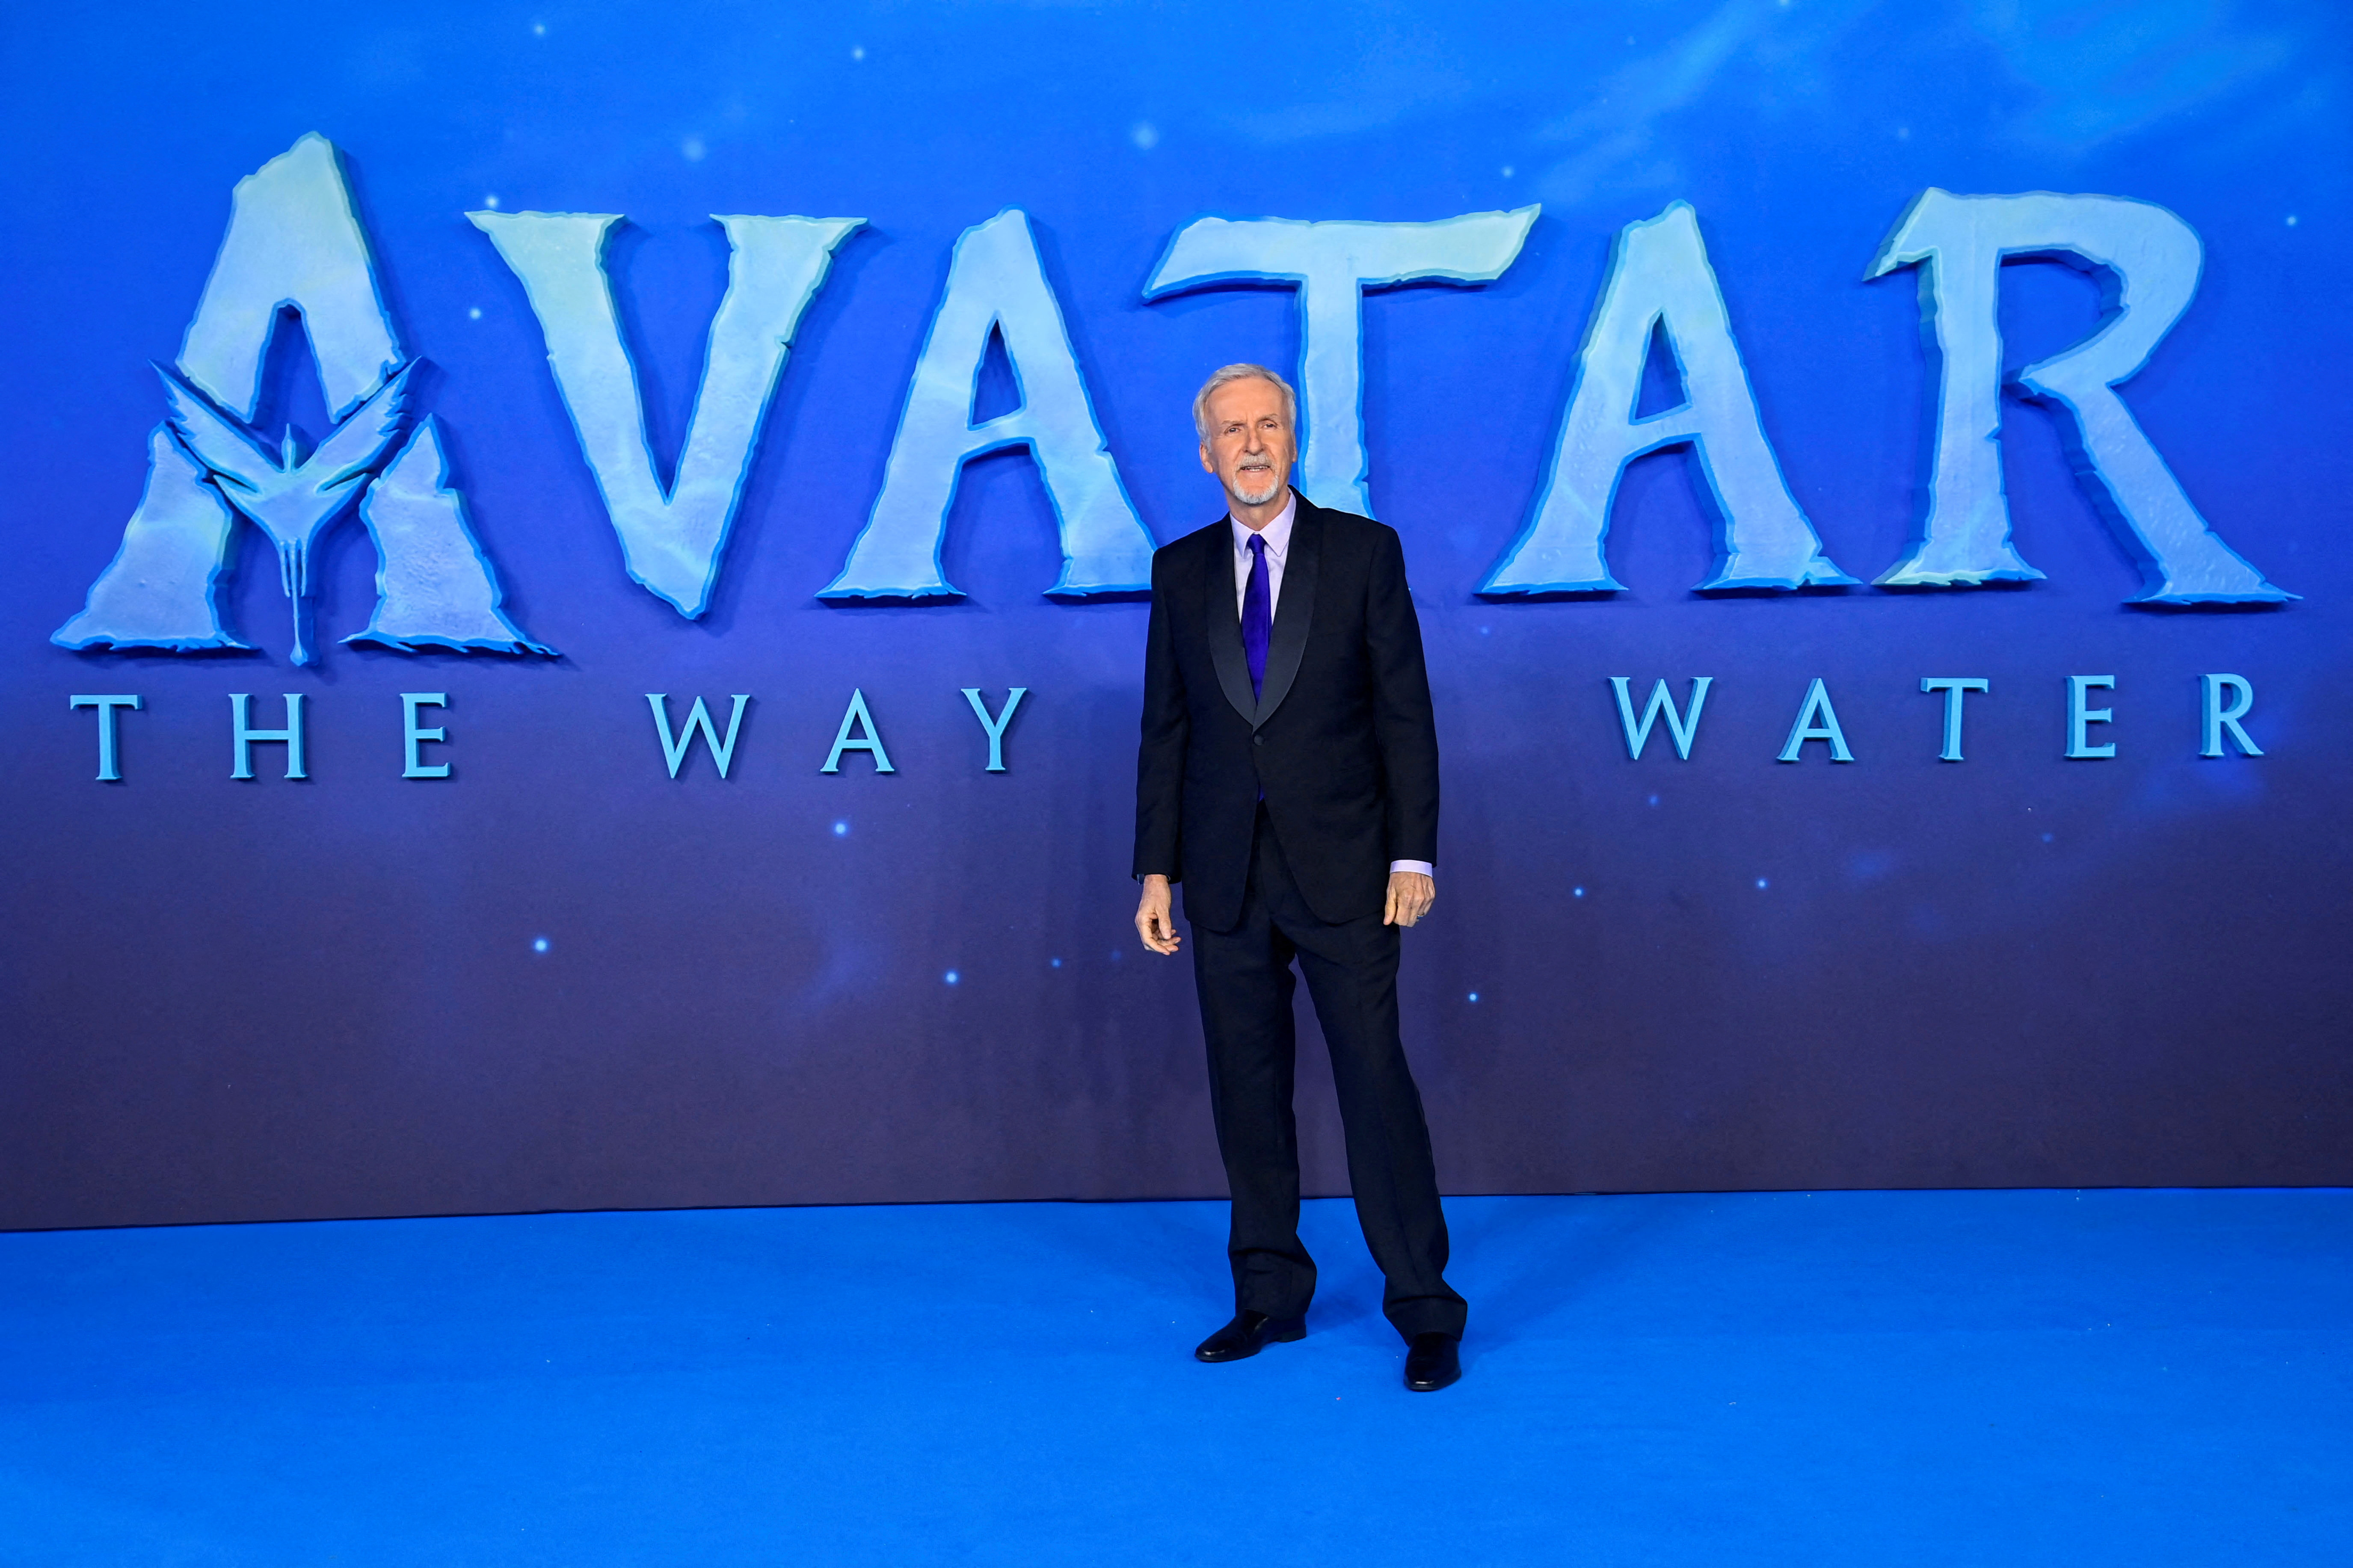 Costly ‘Avatar’ sequel faces reworked film market